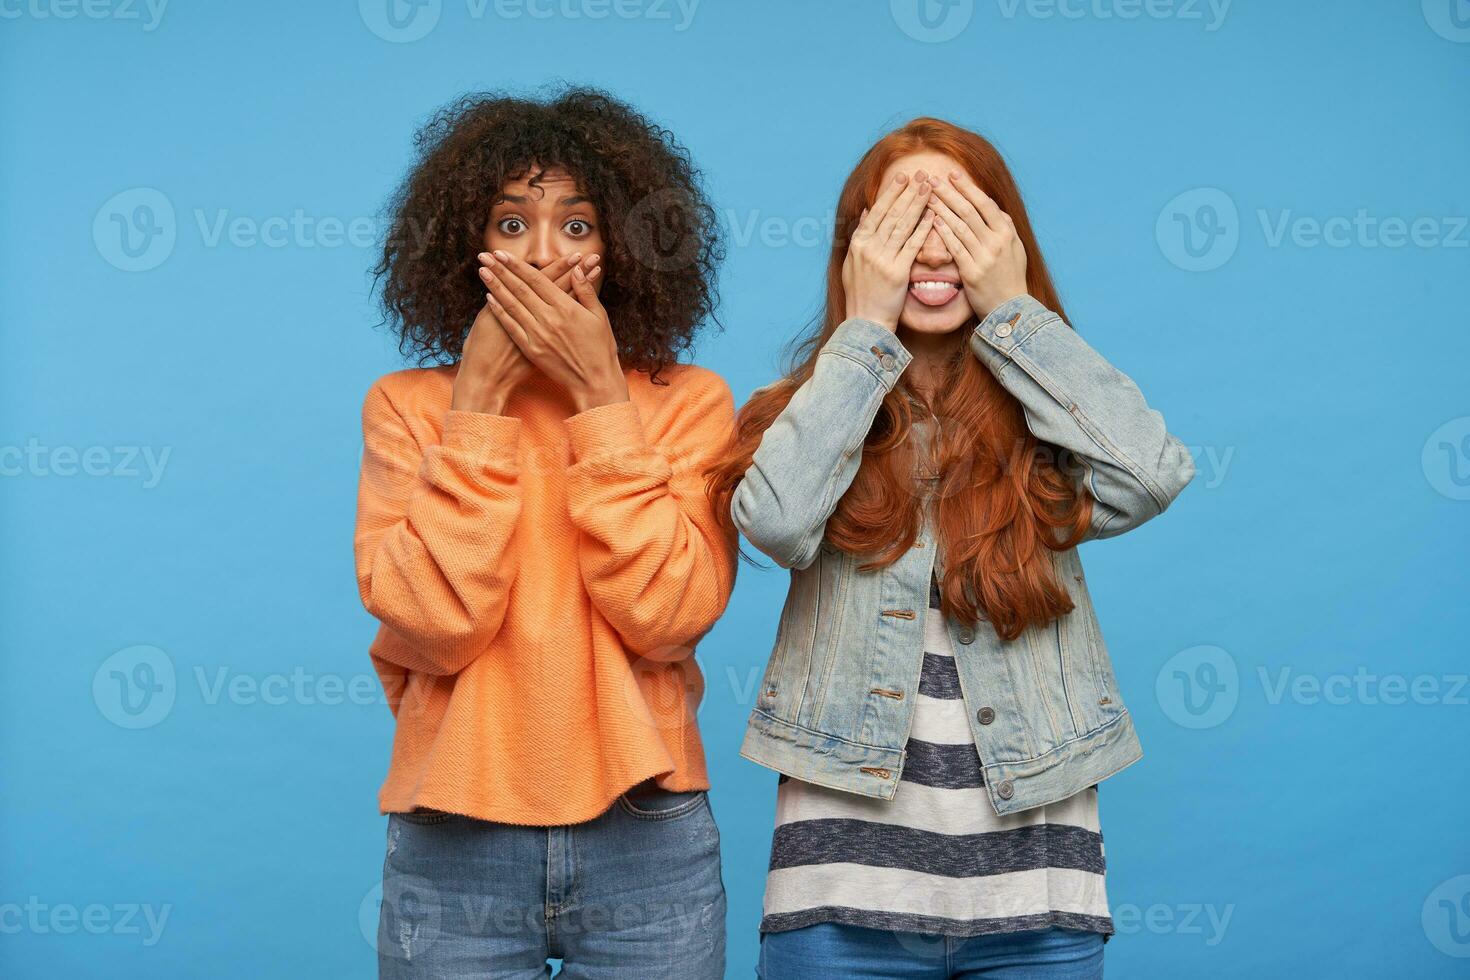 Joyful lovely young redhead lady covering her eyes and showing happily tongue while posing over blue background with amazed young dark haired curly dark skinned woman photo